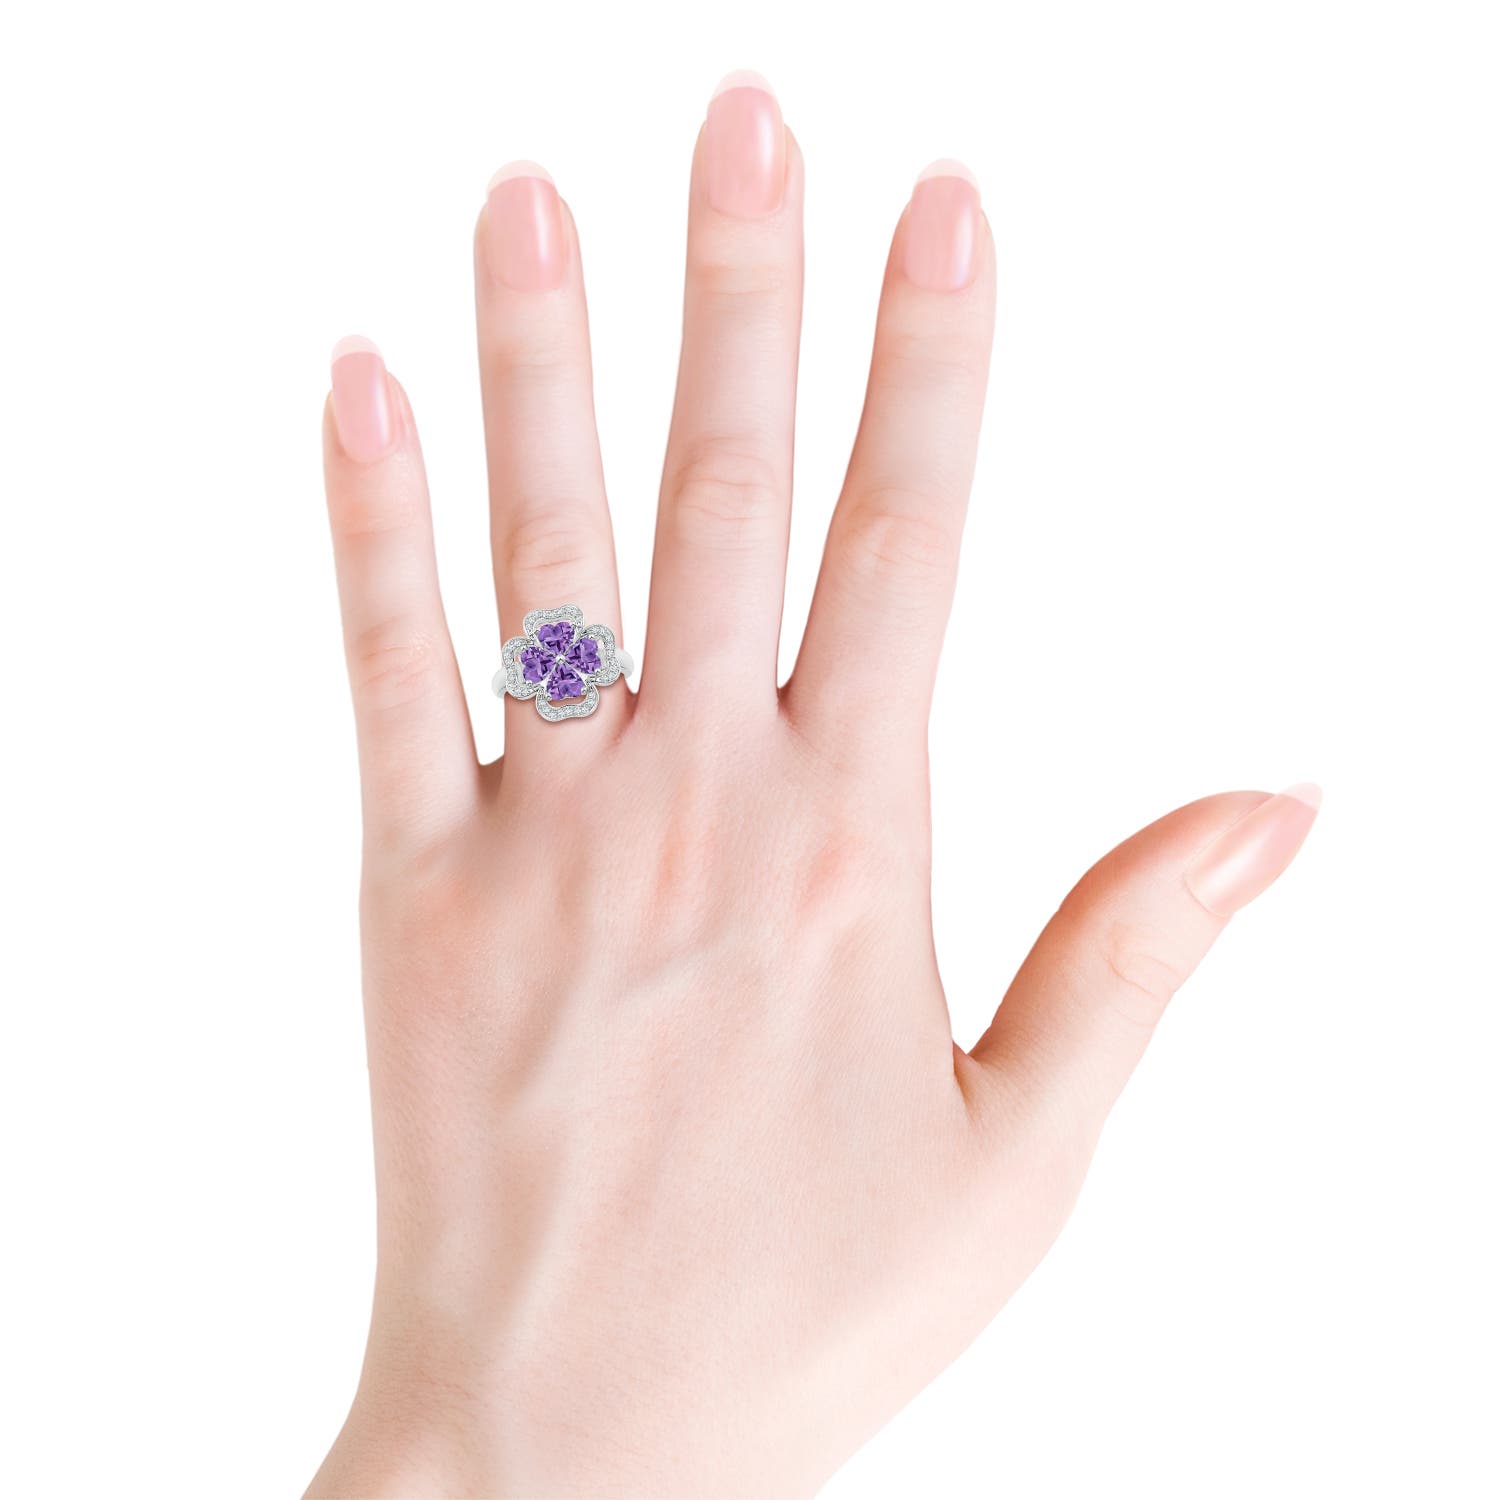 AA - Amethyst / 1.57 CT / 14 KT White Gold